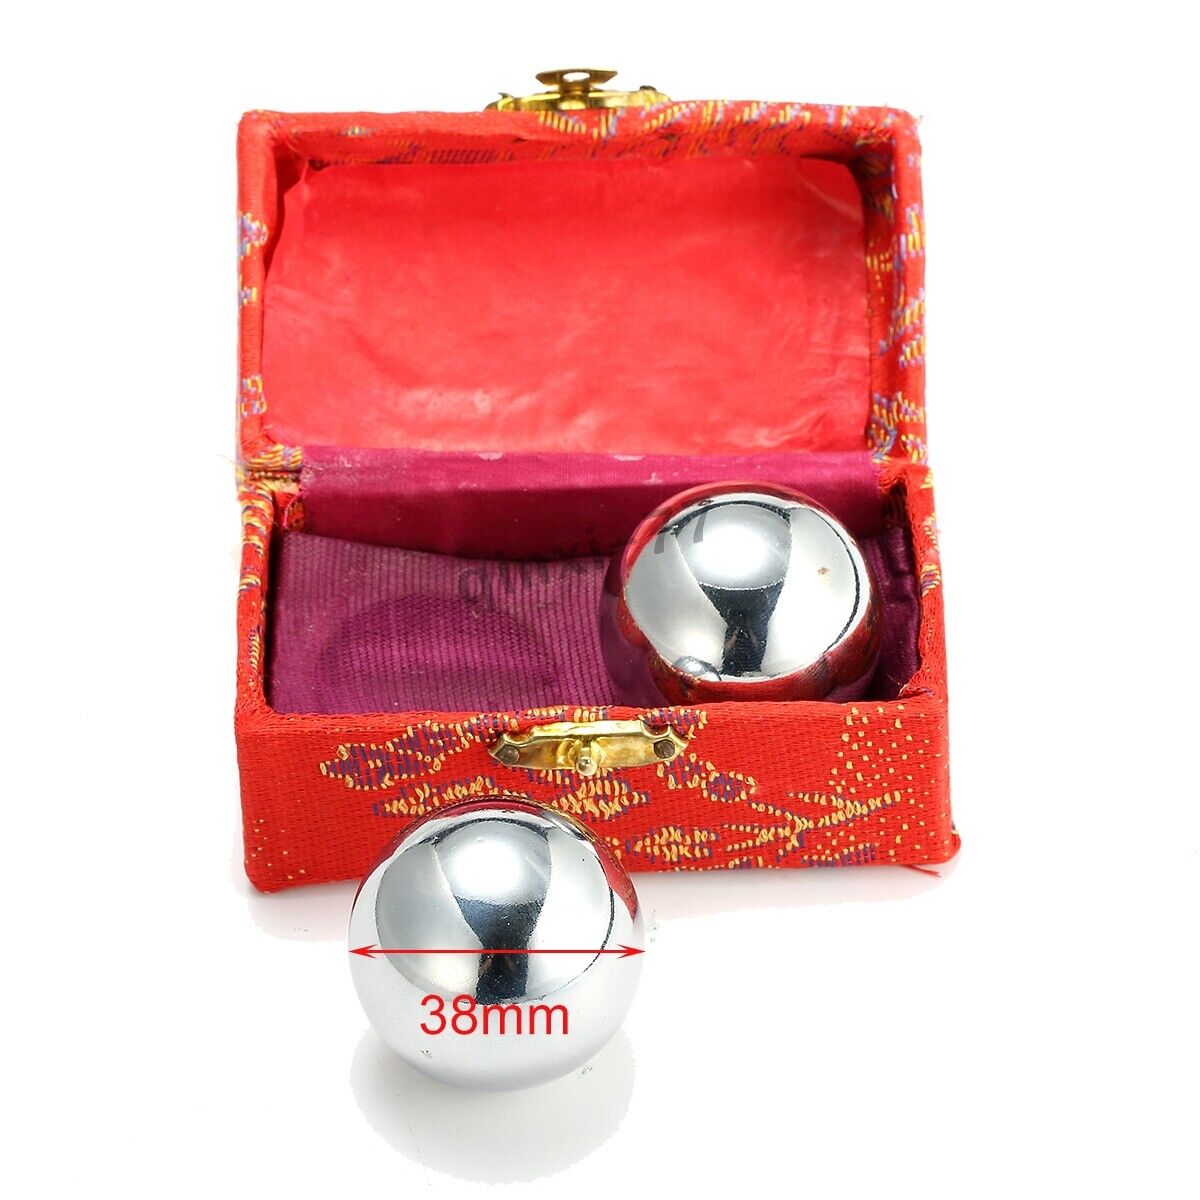 2x Chinese Baoding Balls Chrome Health Exercise Stress Relief Relaxation Therapy